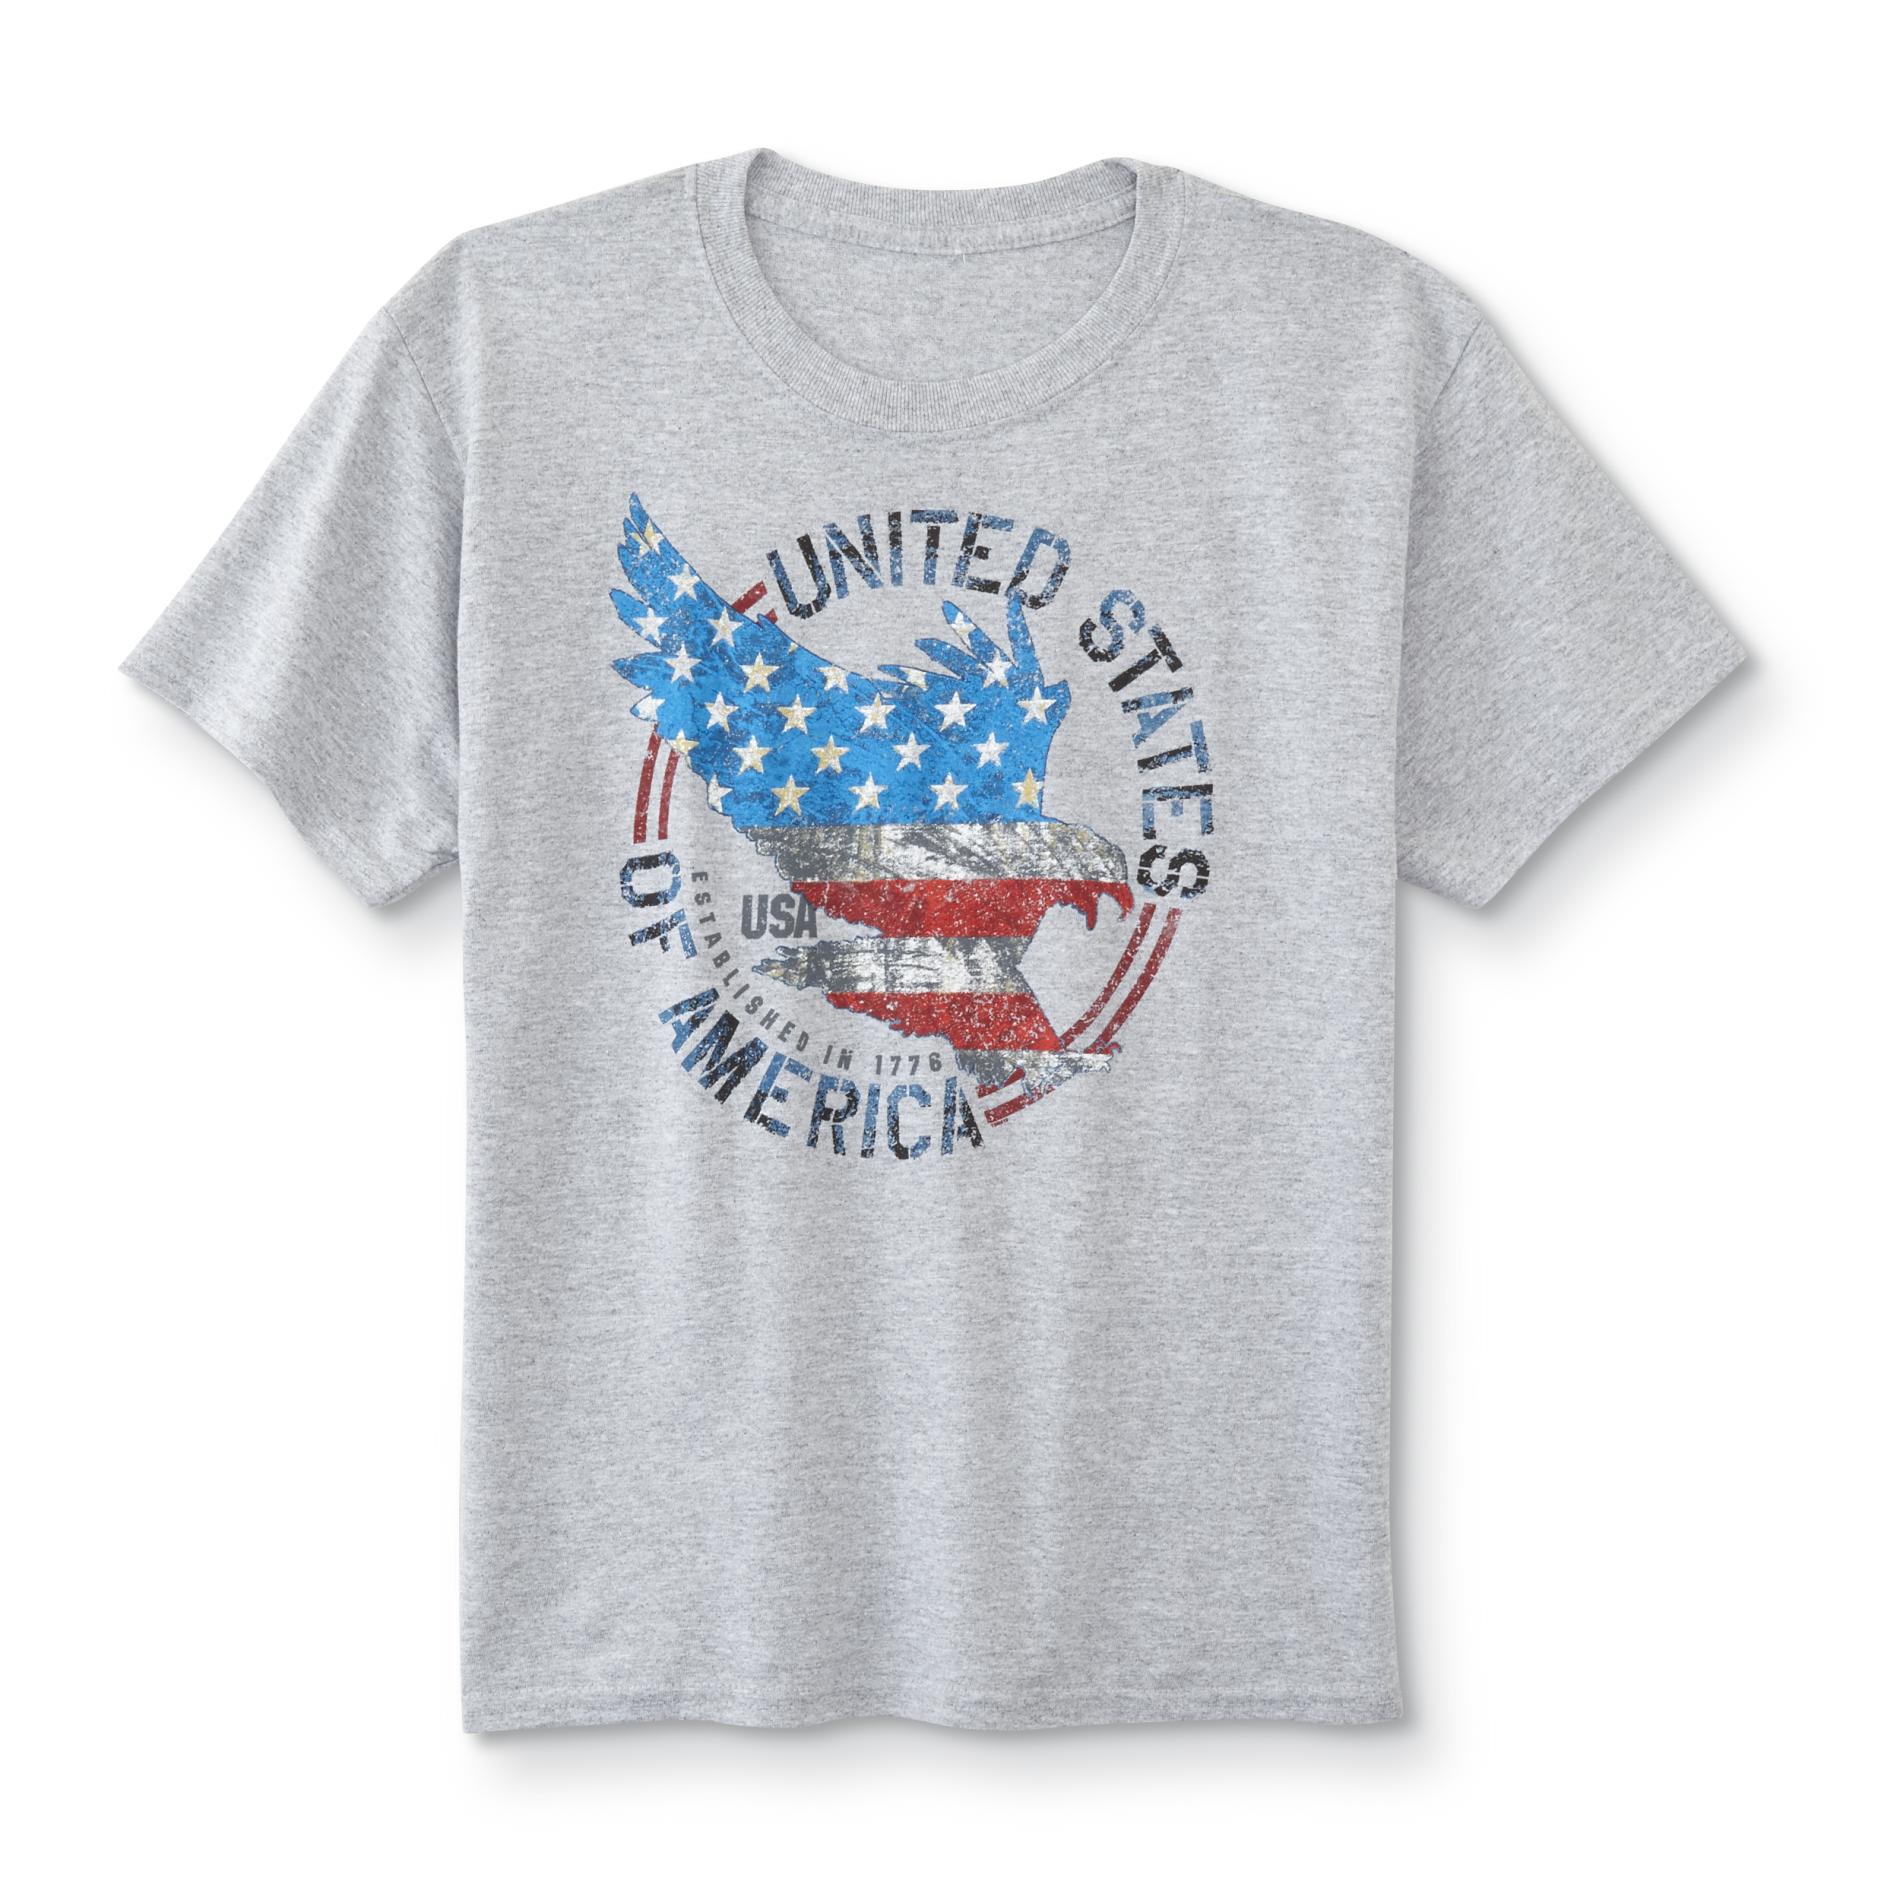 Boys' Graphic T-Shirt - United States Of America